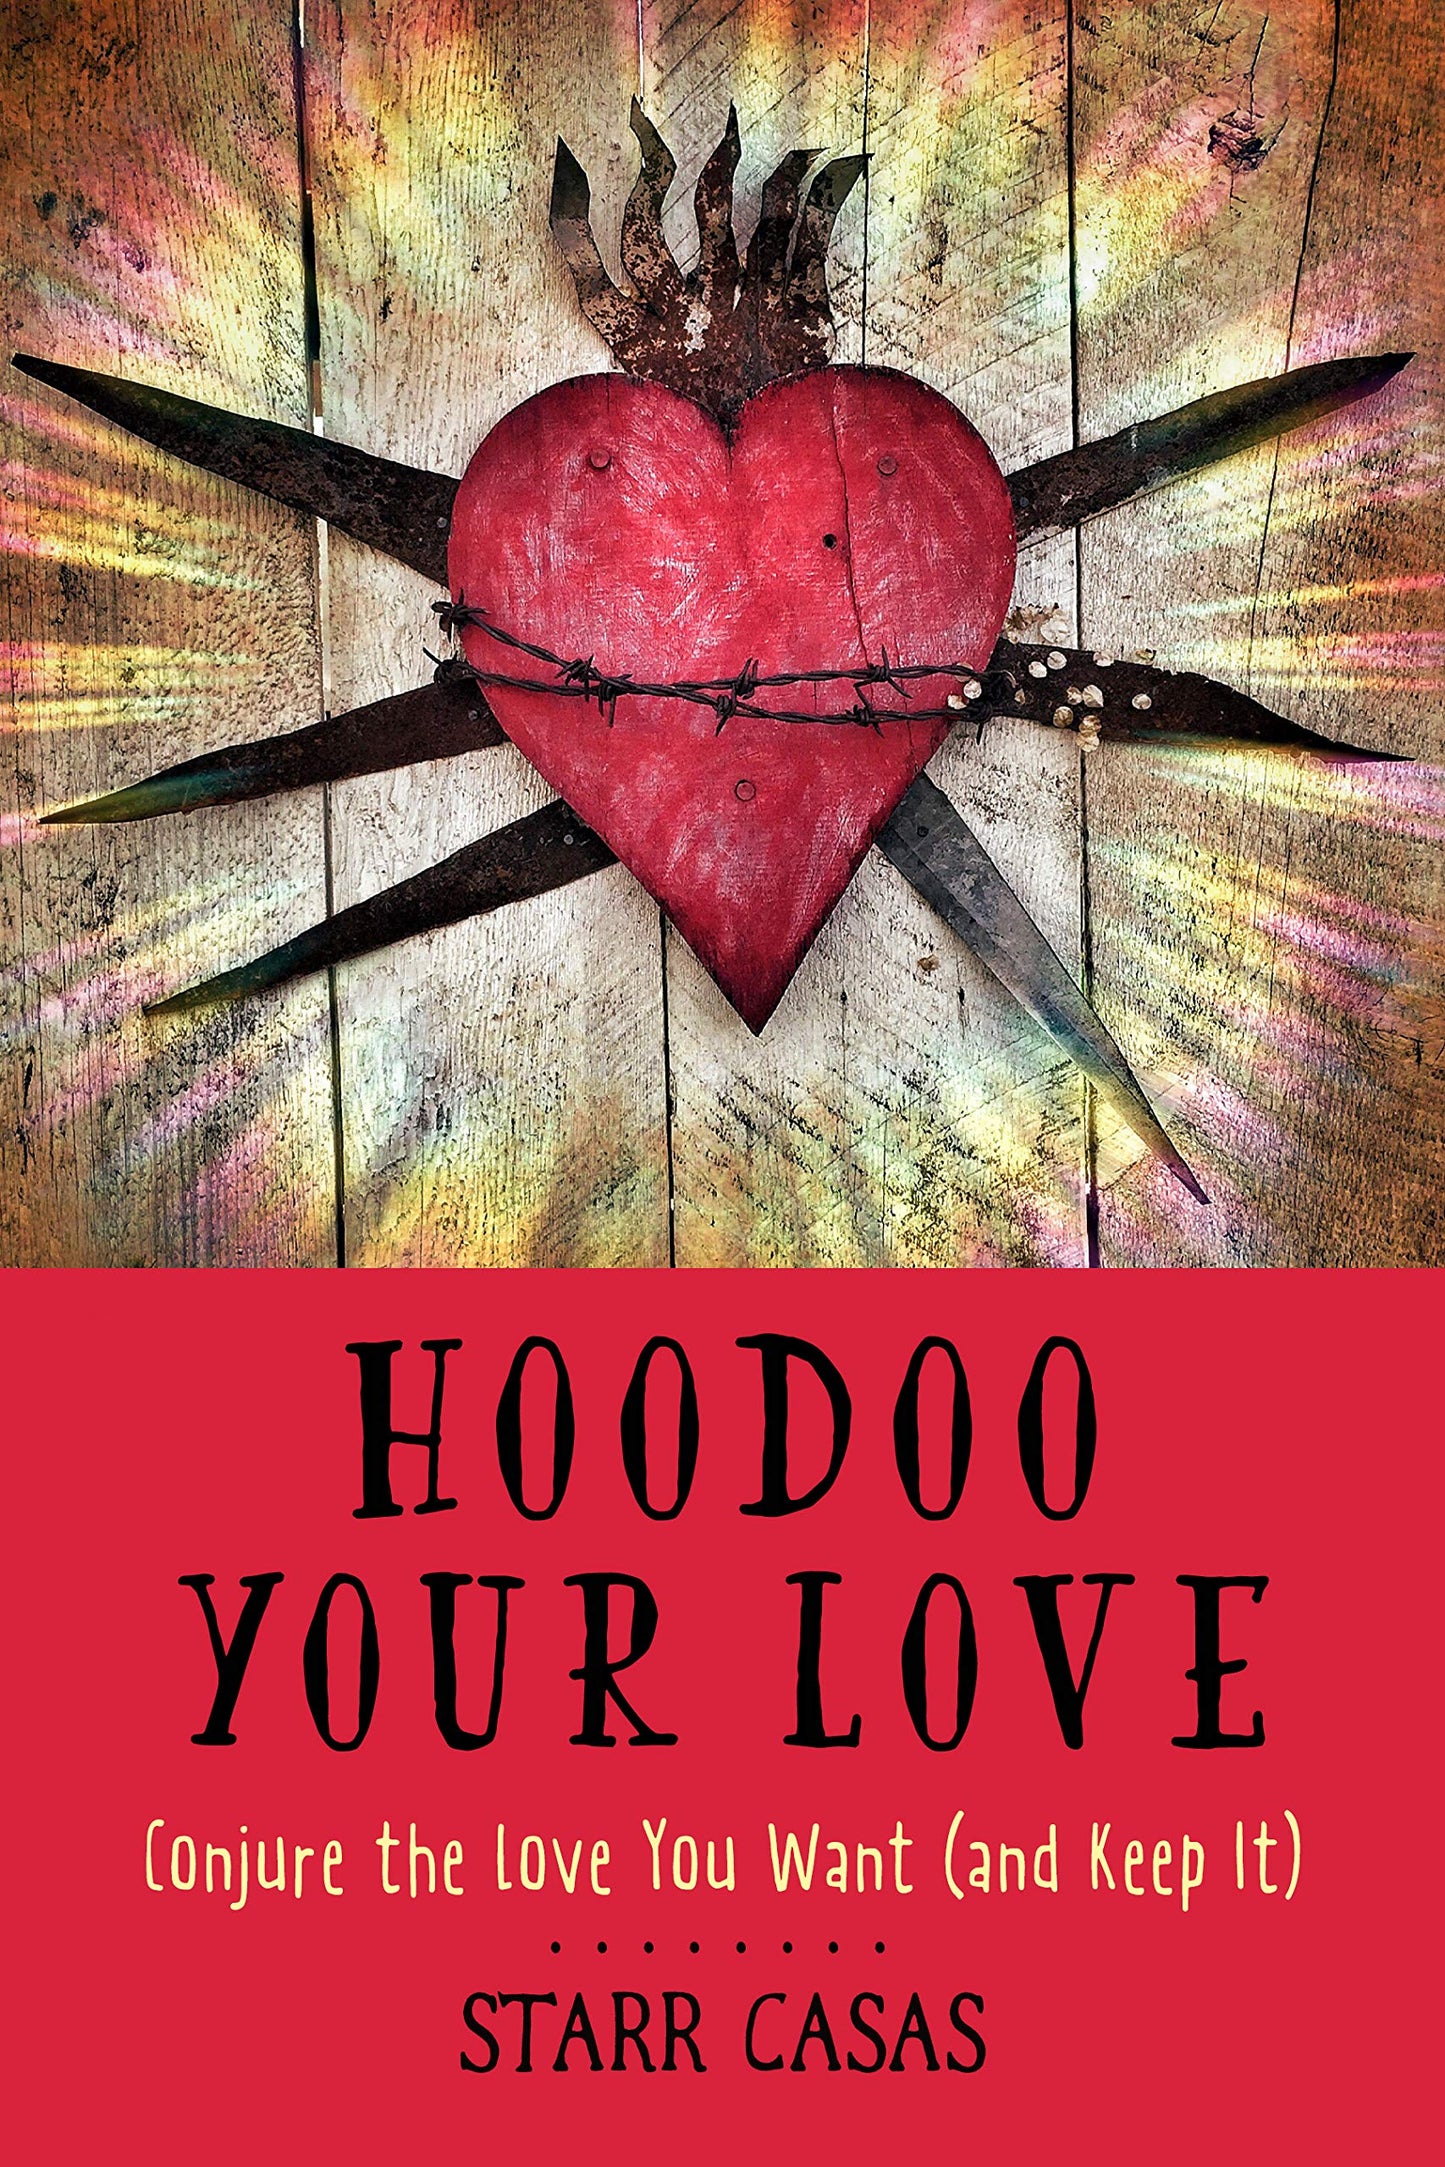 Hoodoo Your Love, by Starr Casas